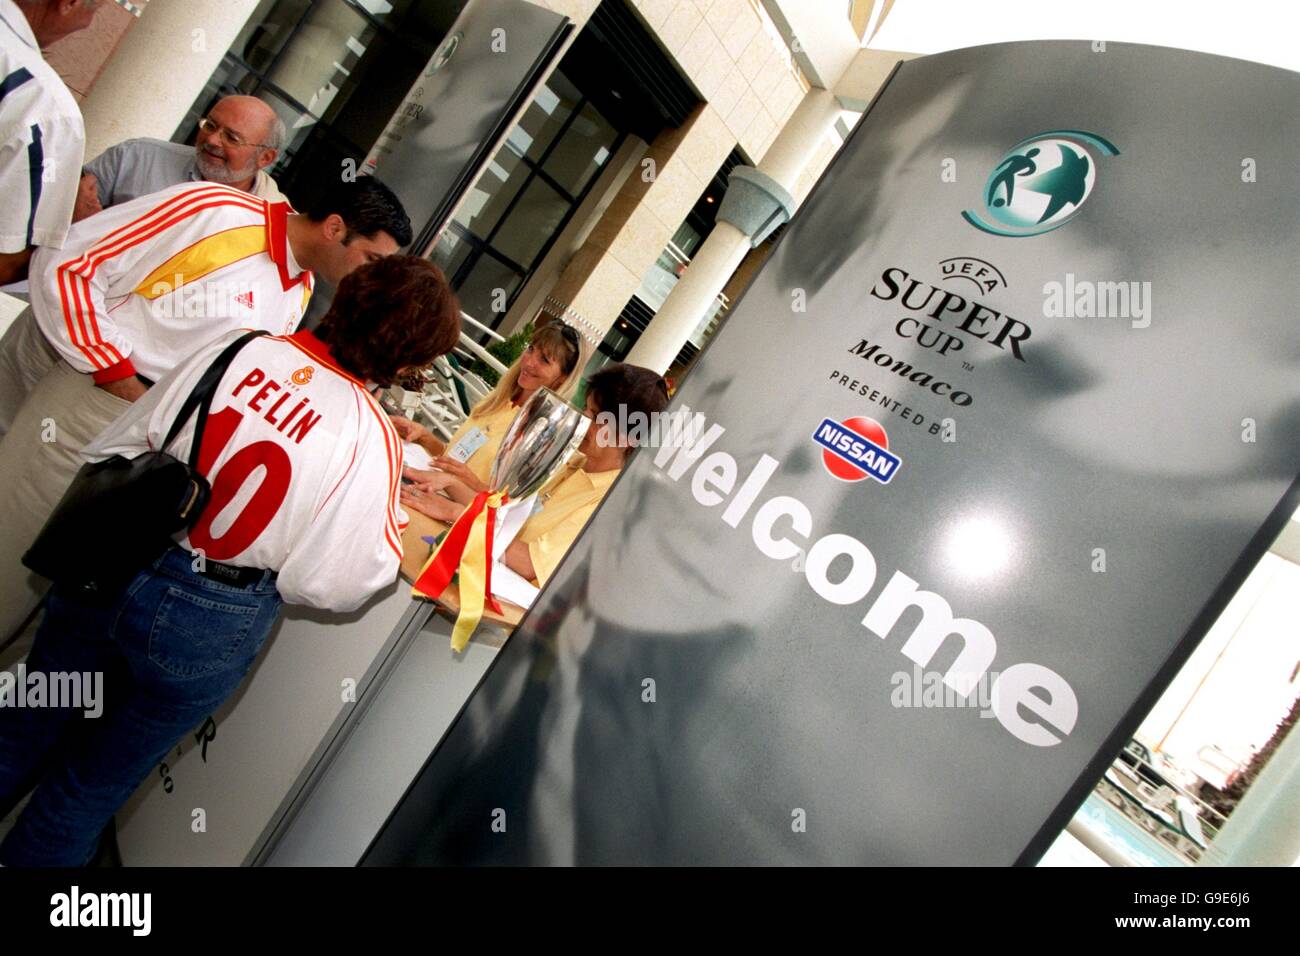 Soccer - UEFA Super Cup - Real Madrid v Galatasaray. A sign welcomes fans to the UEFA Super Cup Stock Photo